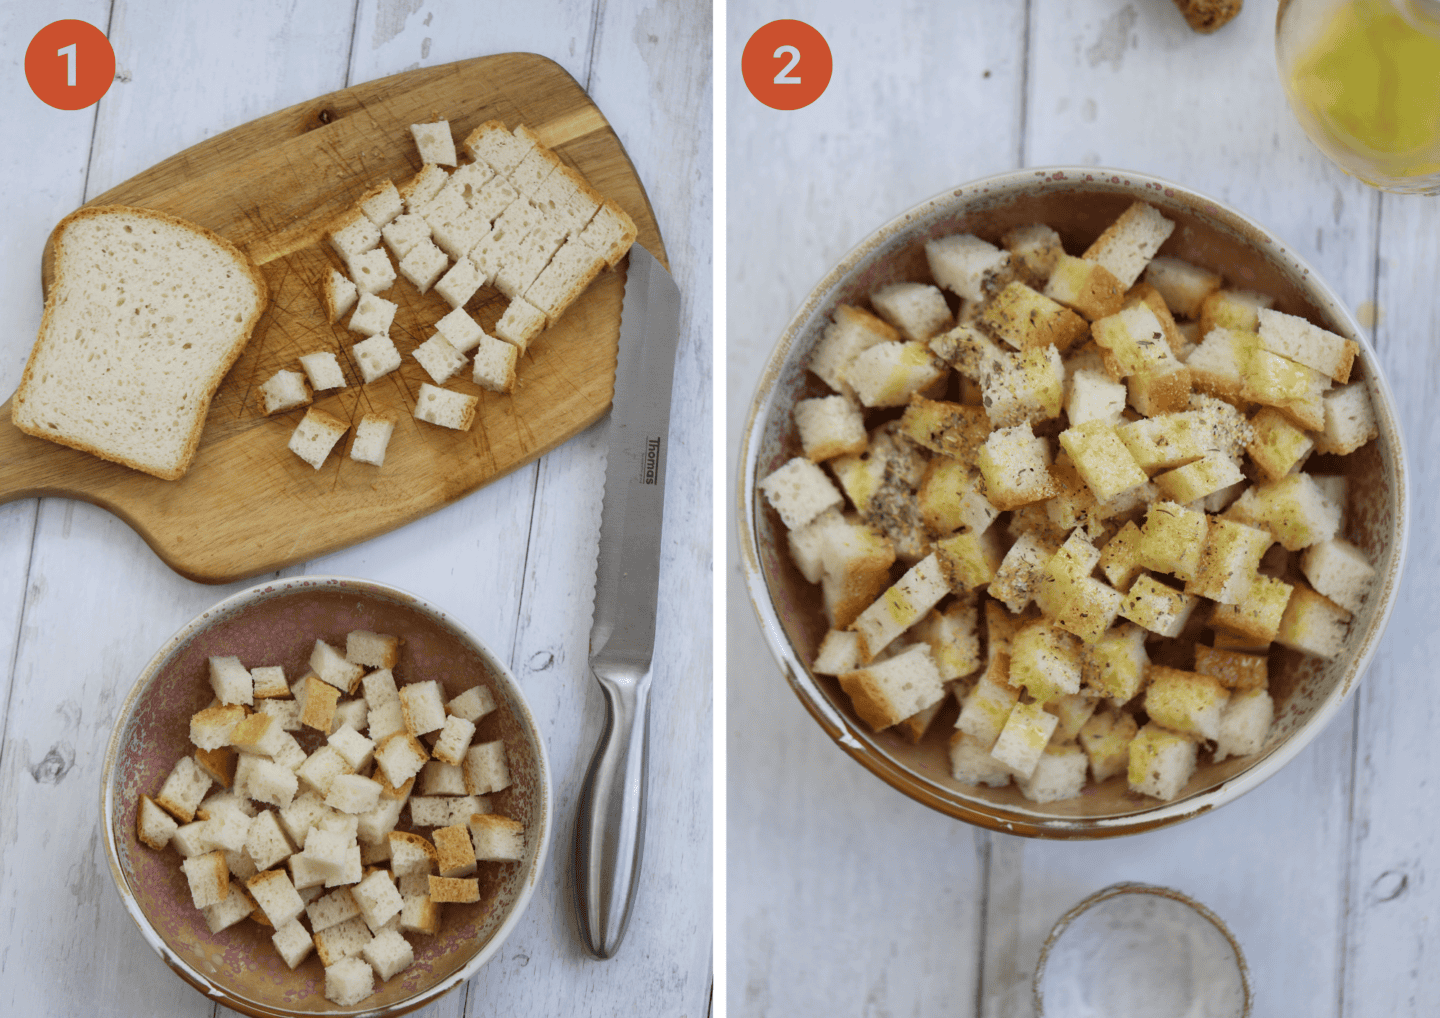 Cutting the bread for croutons and the uncooked croutons in a bowl with the seasoning.